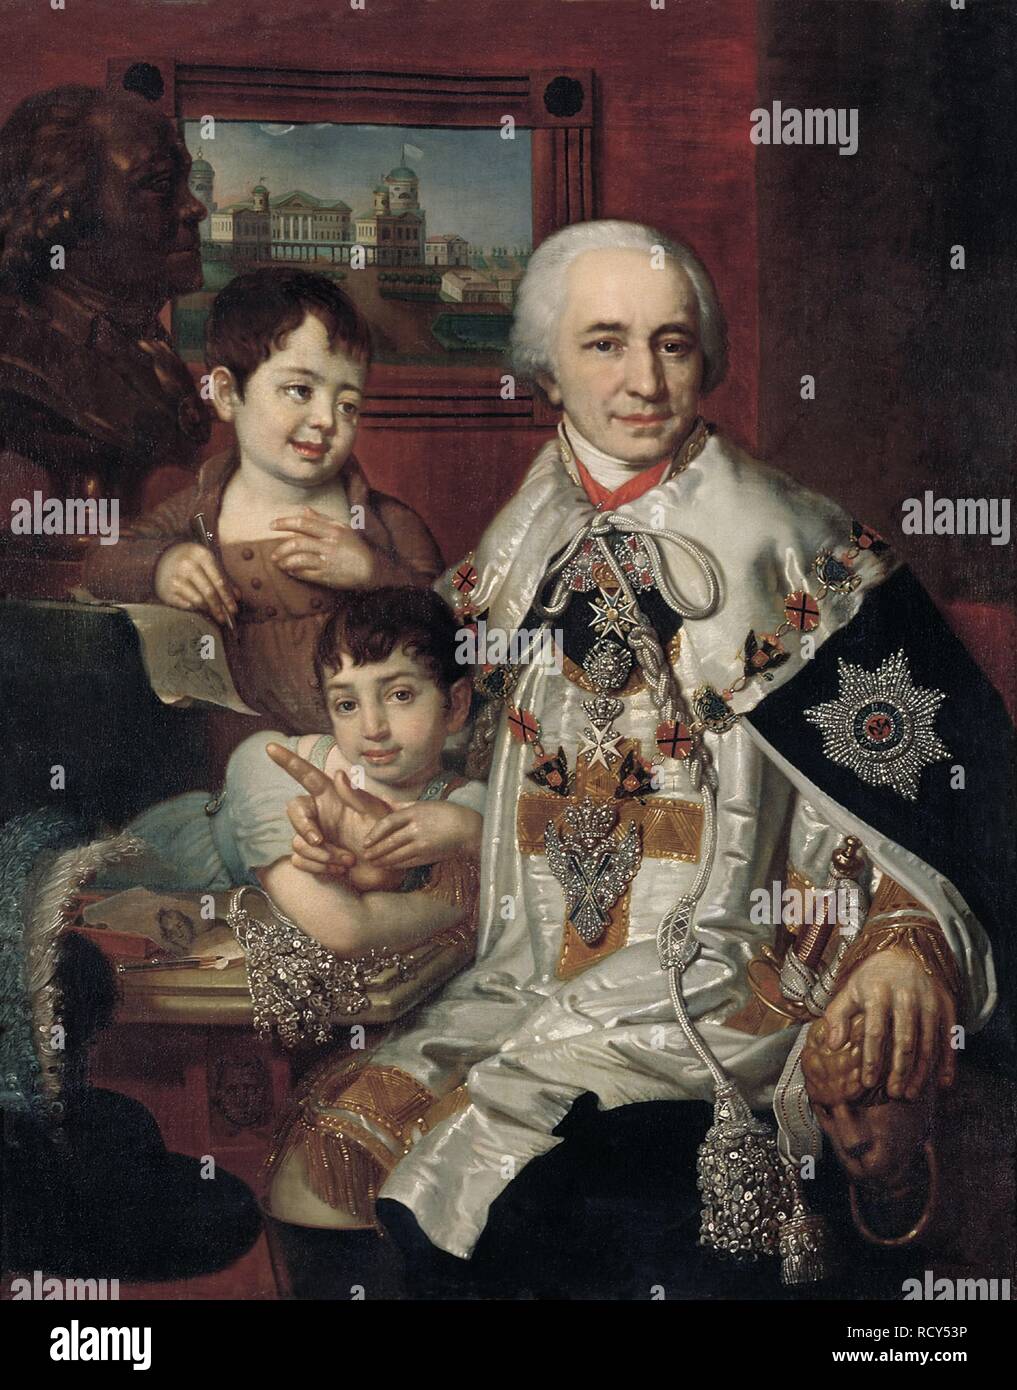 Portrait of Admiral Count Grigory Grigoryevich Kushelev (1754-1833) with children. Museum: State Open-air Museum of History and Architecture Novgorodian Kremlin, Novgorod. Author: Borovikovsky, Vladimir Lukich. Stock Photo